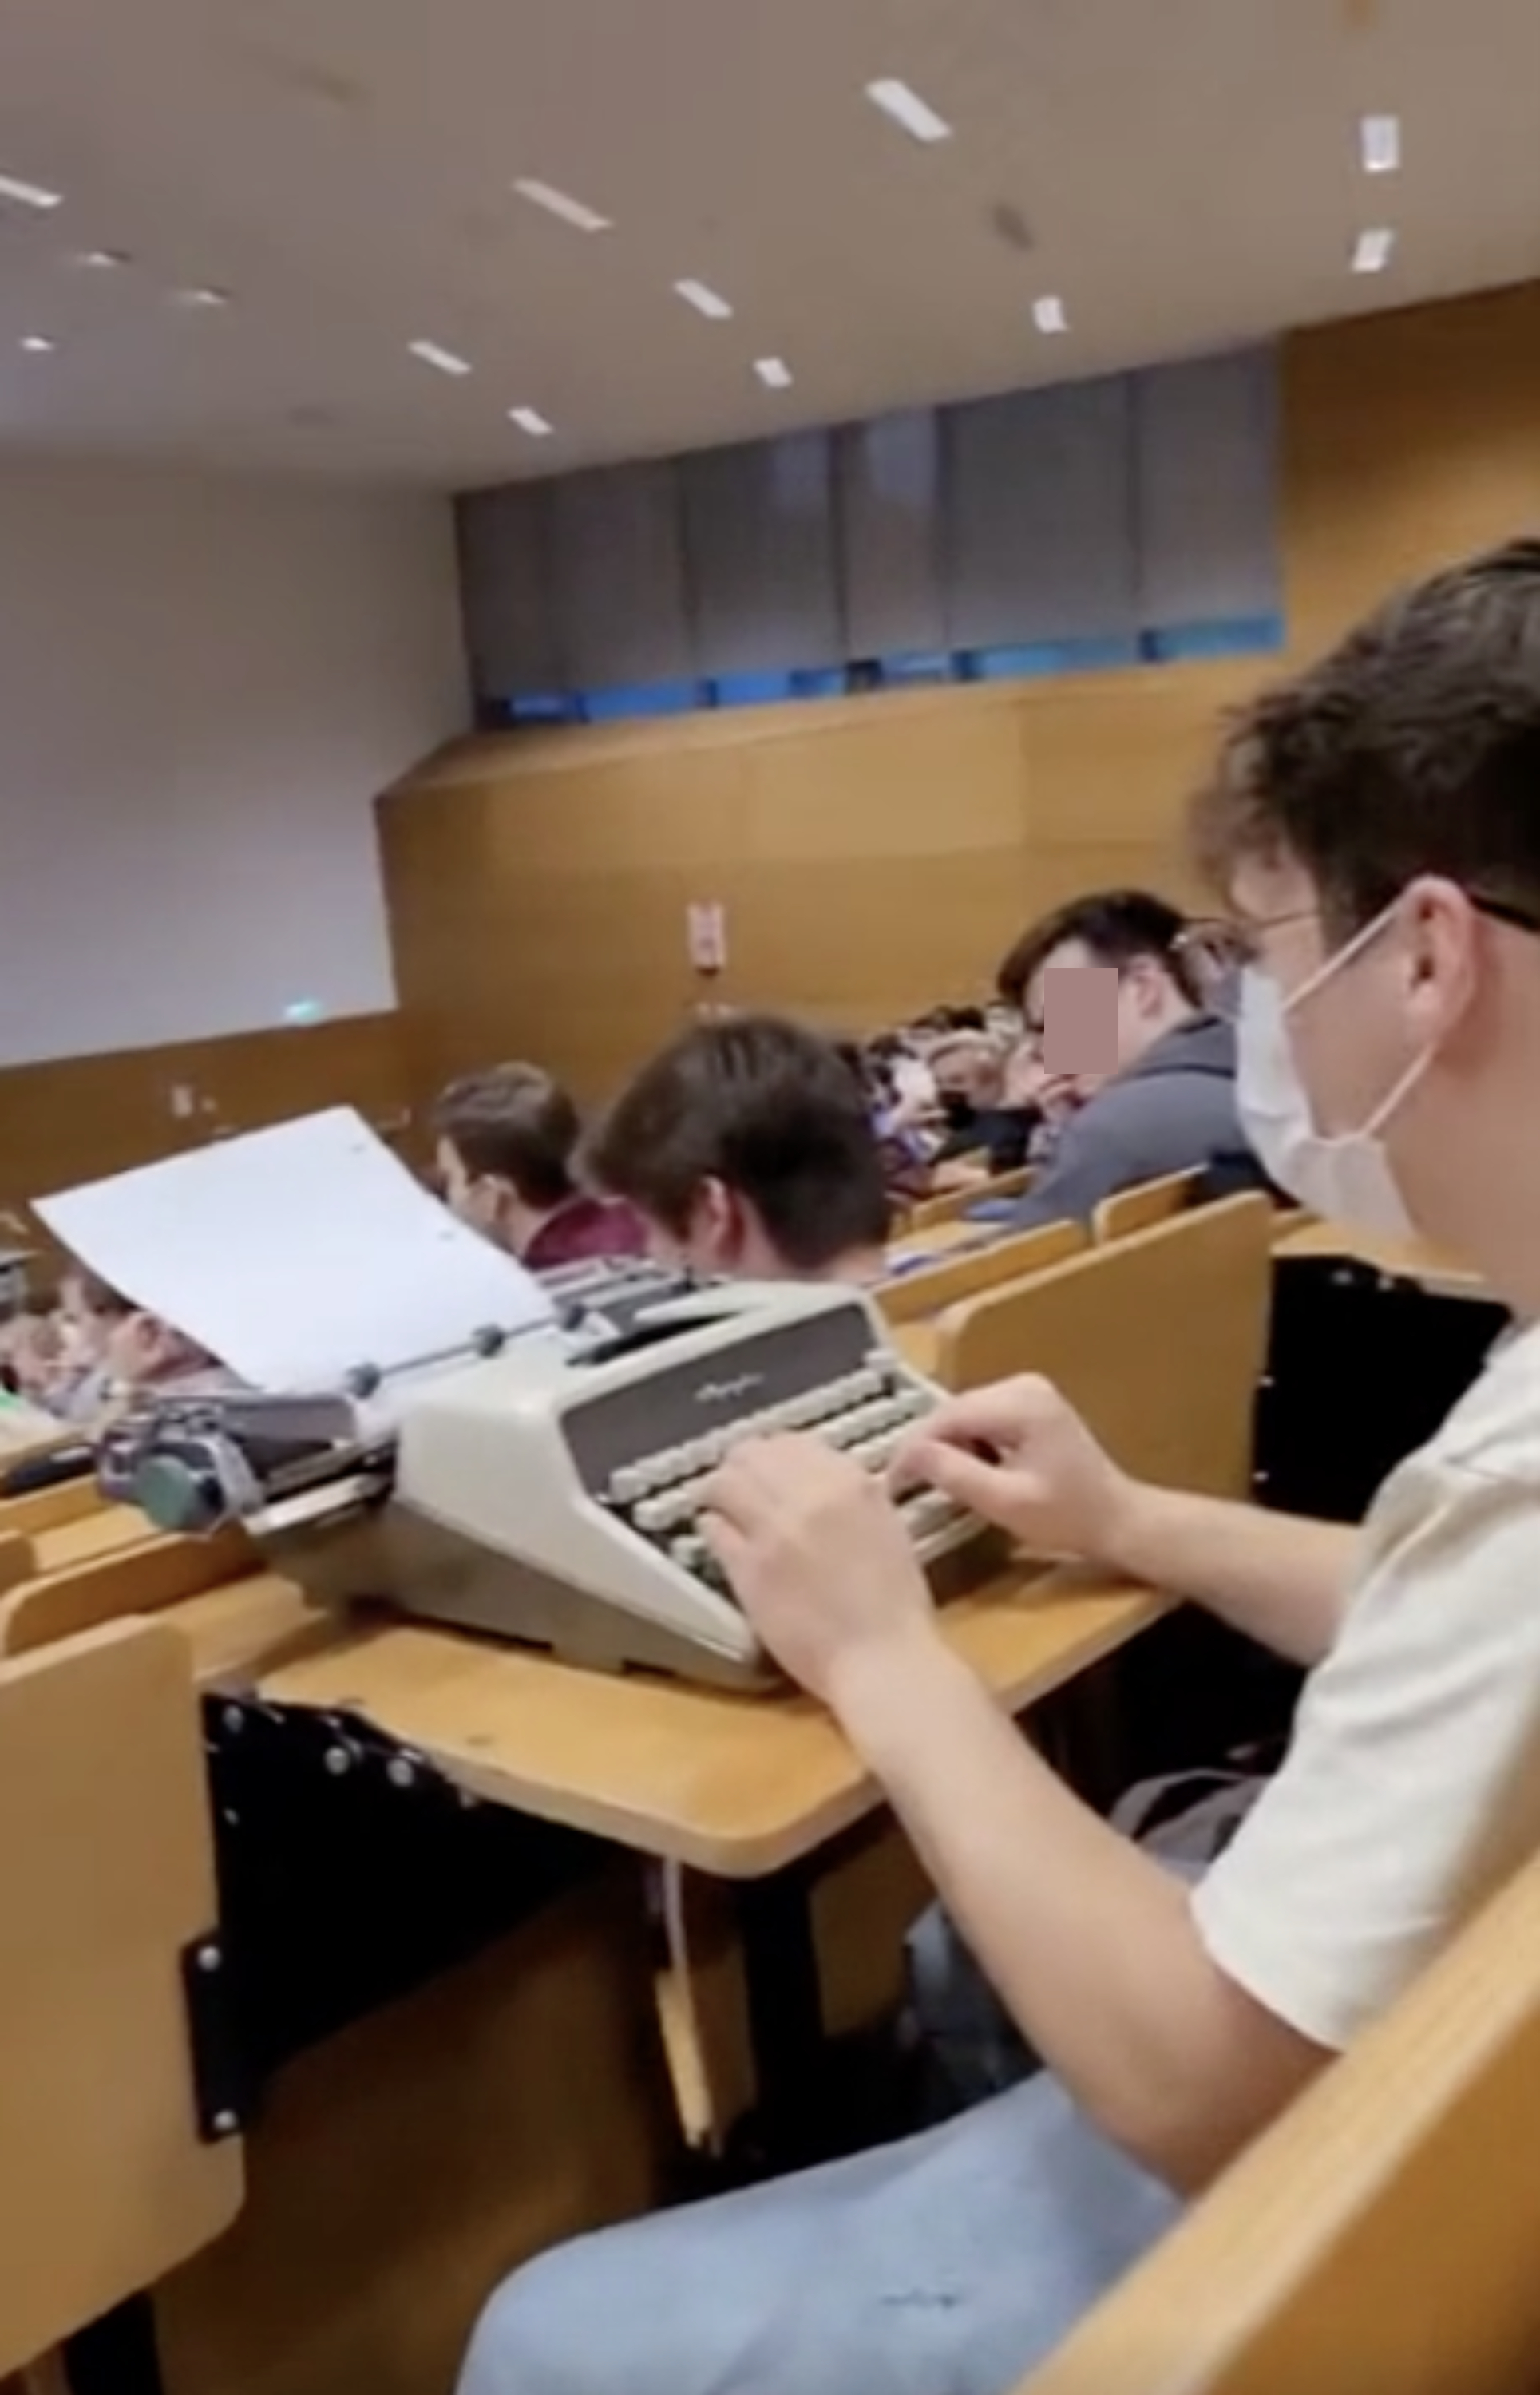 Student sitting in class typing on a typewriter